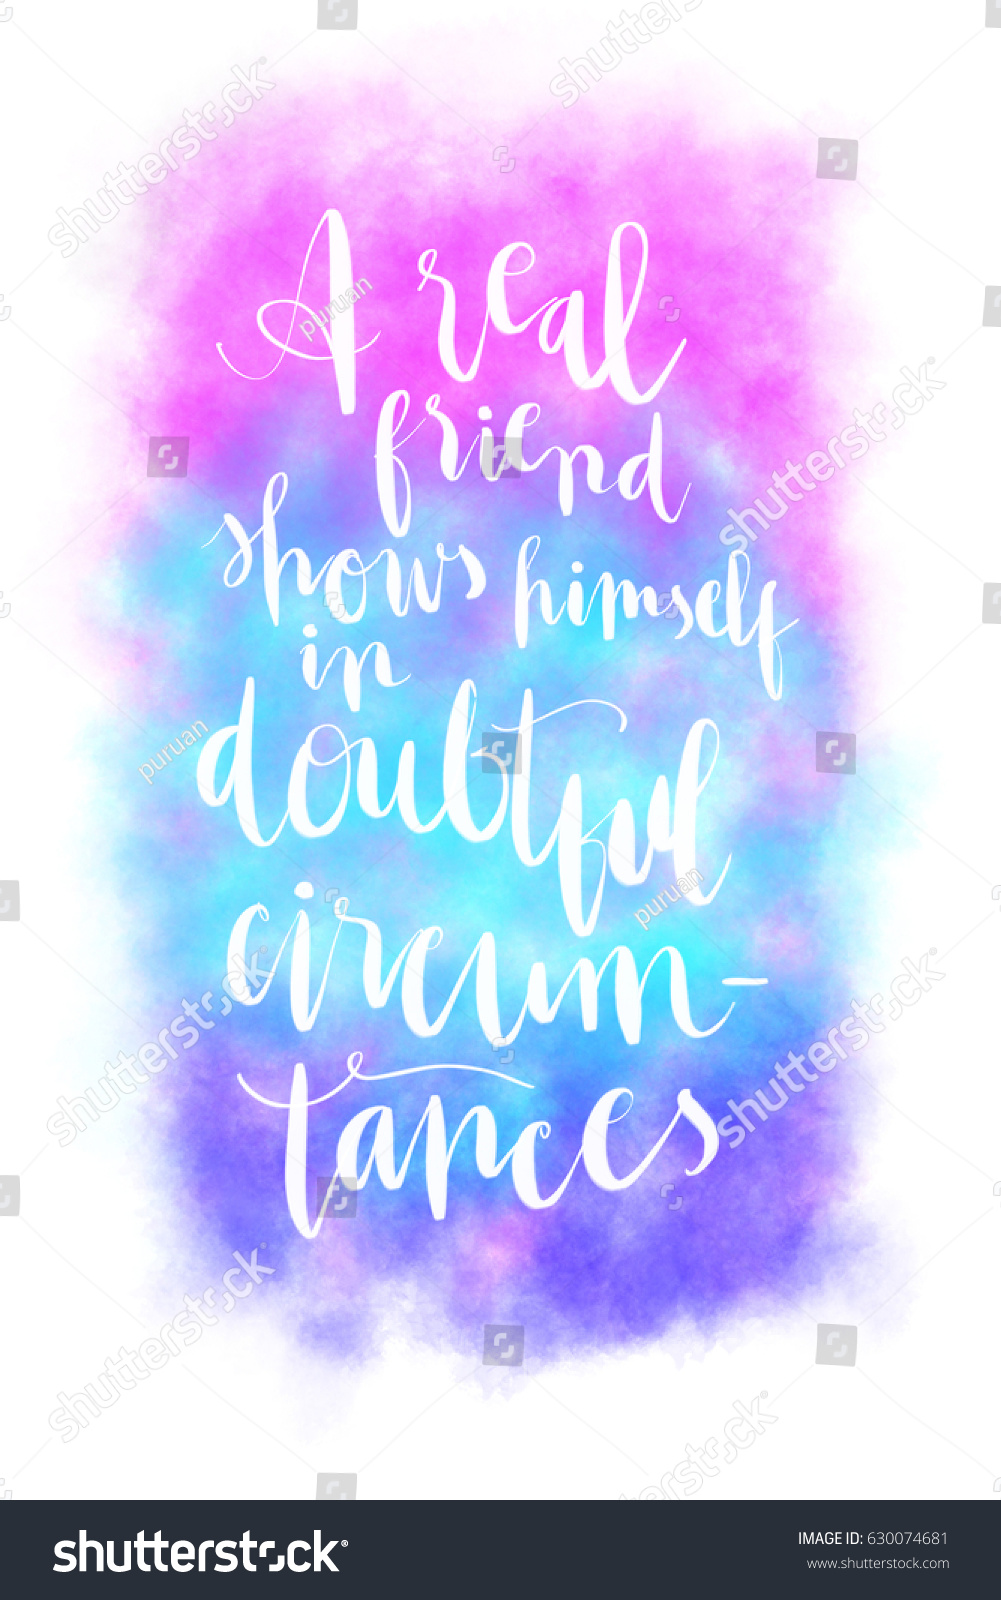 Quotes Lettering On Colorful Background Stock Illustration 